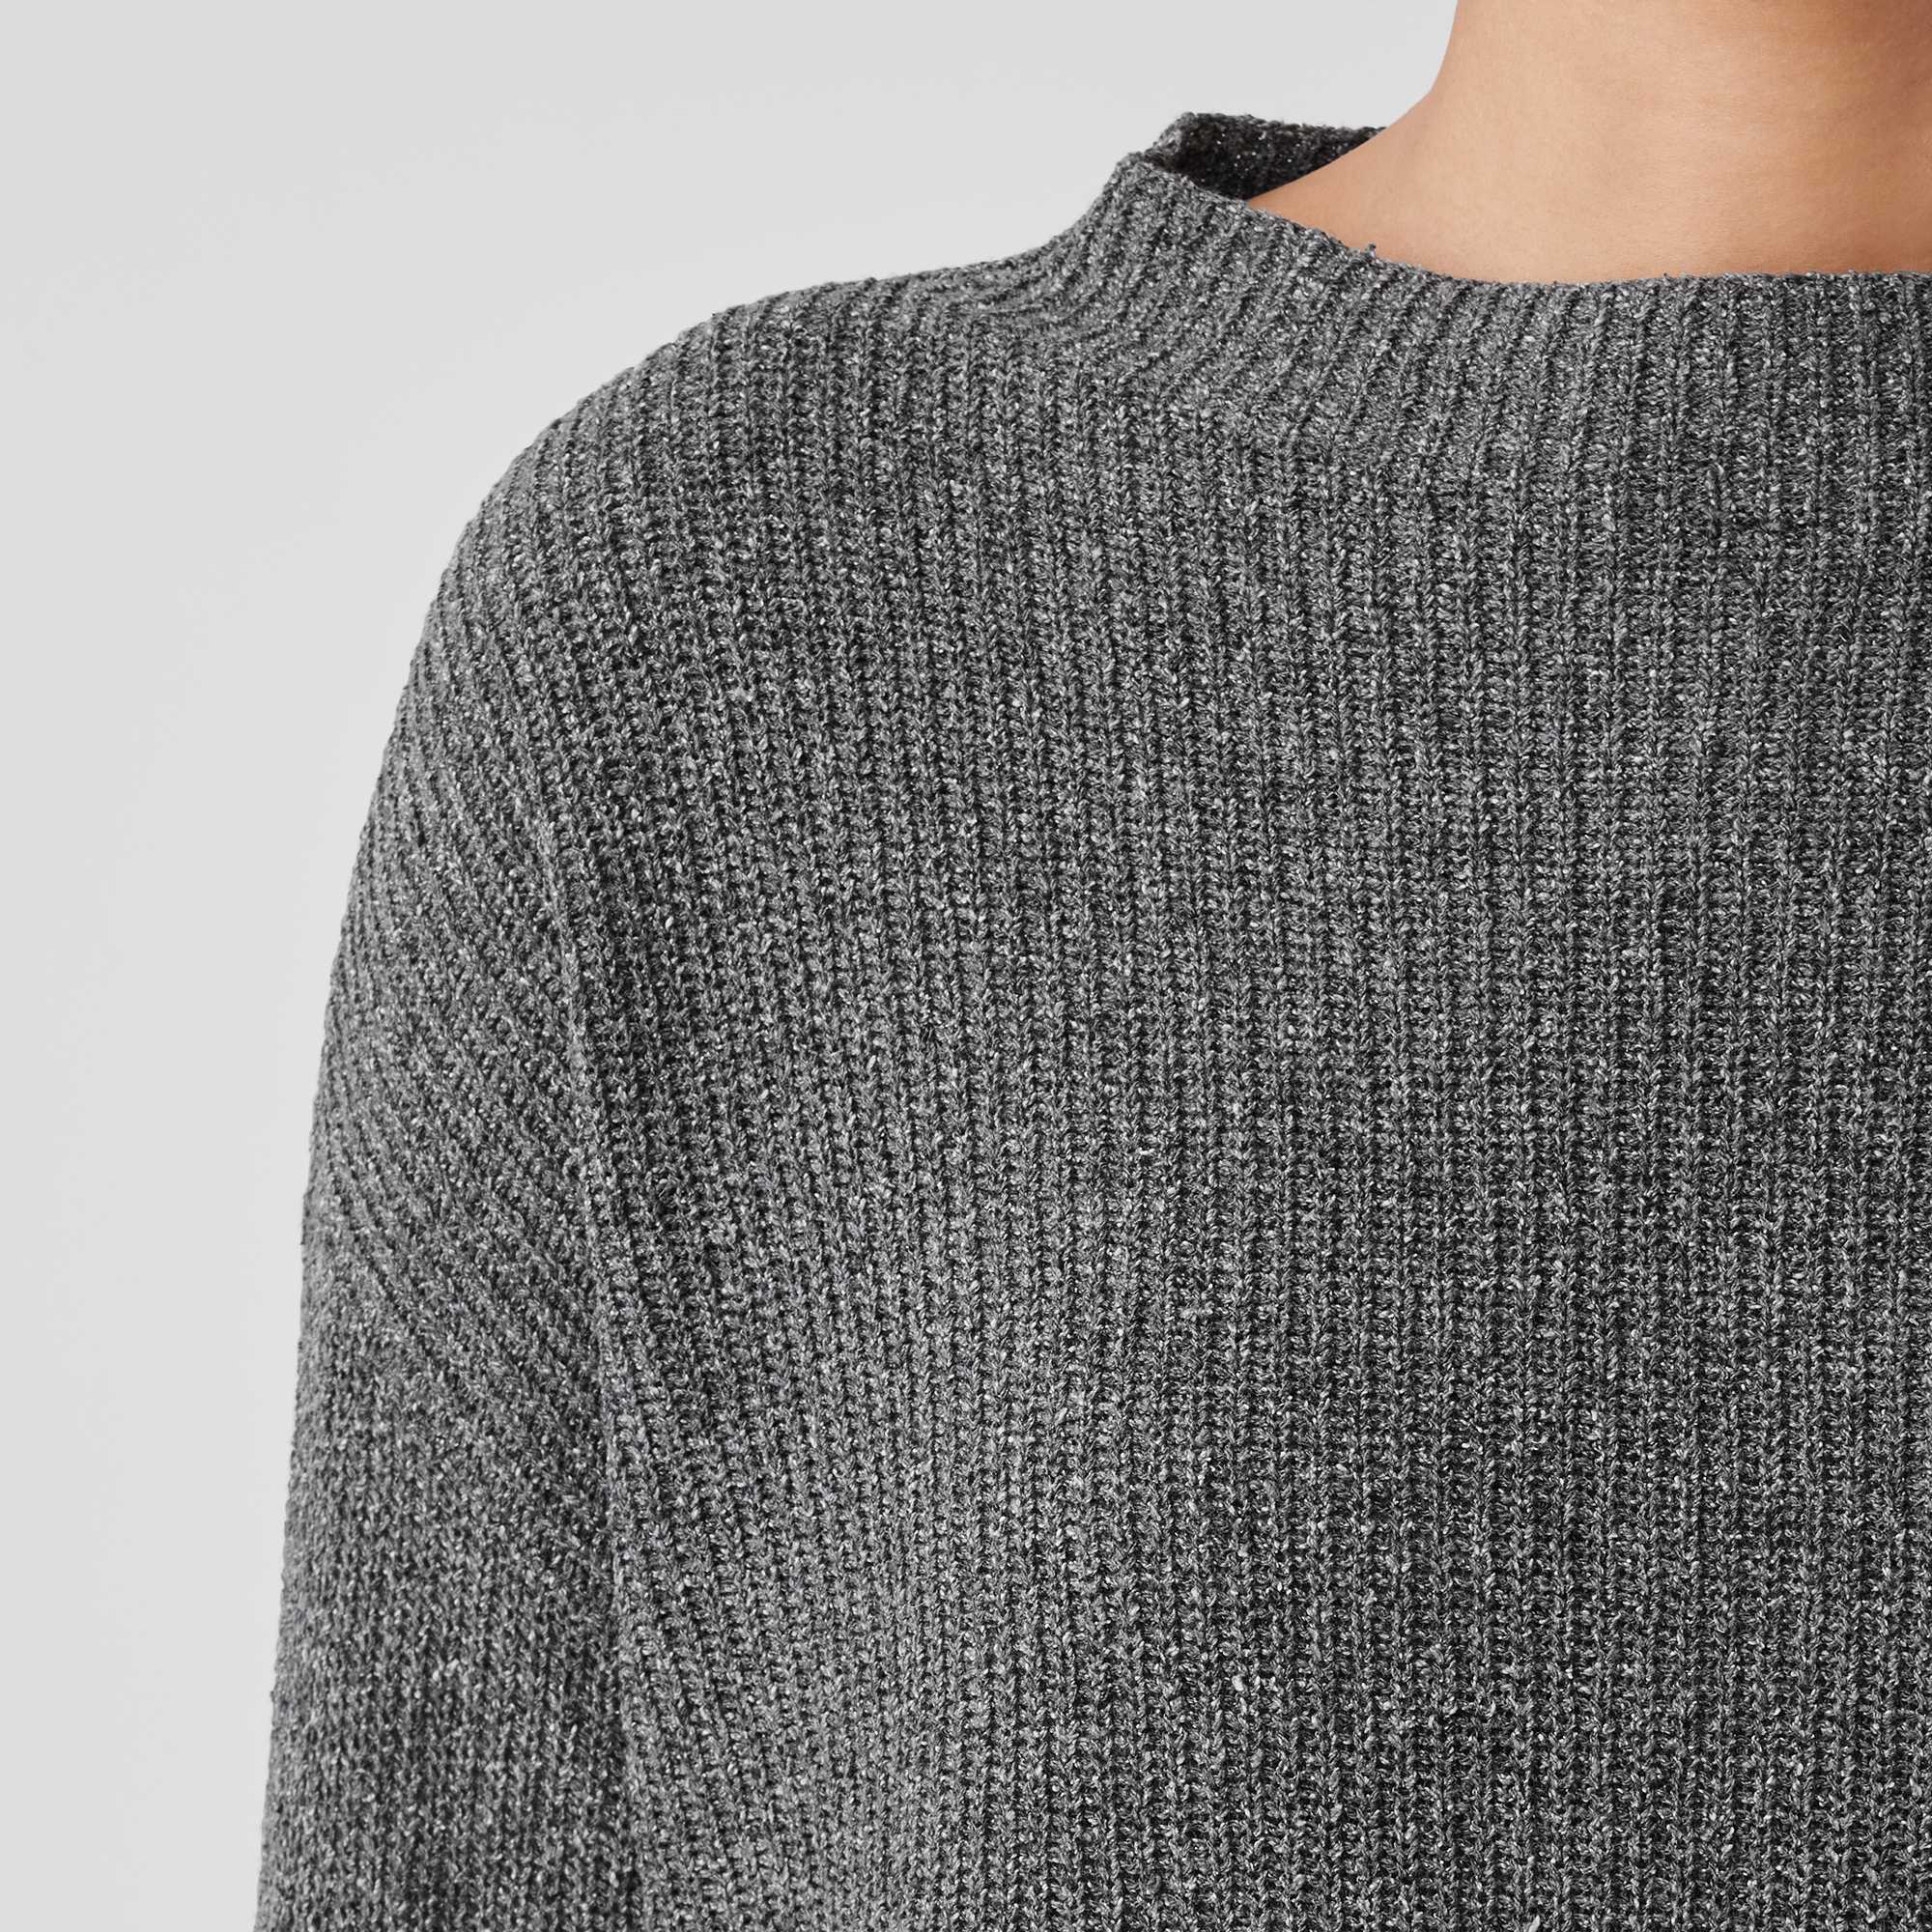 BOXY FUNNEL NECK SWEATER